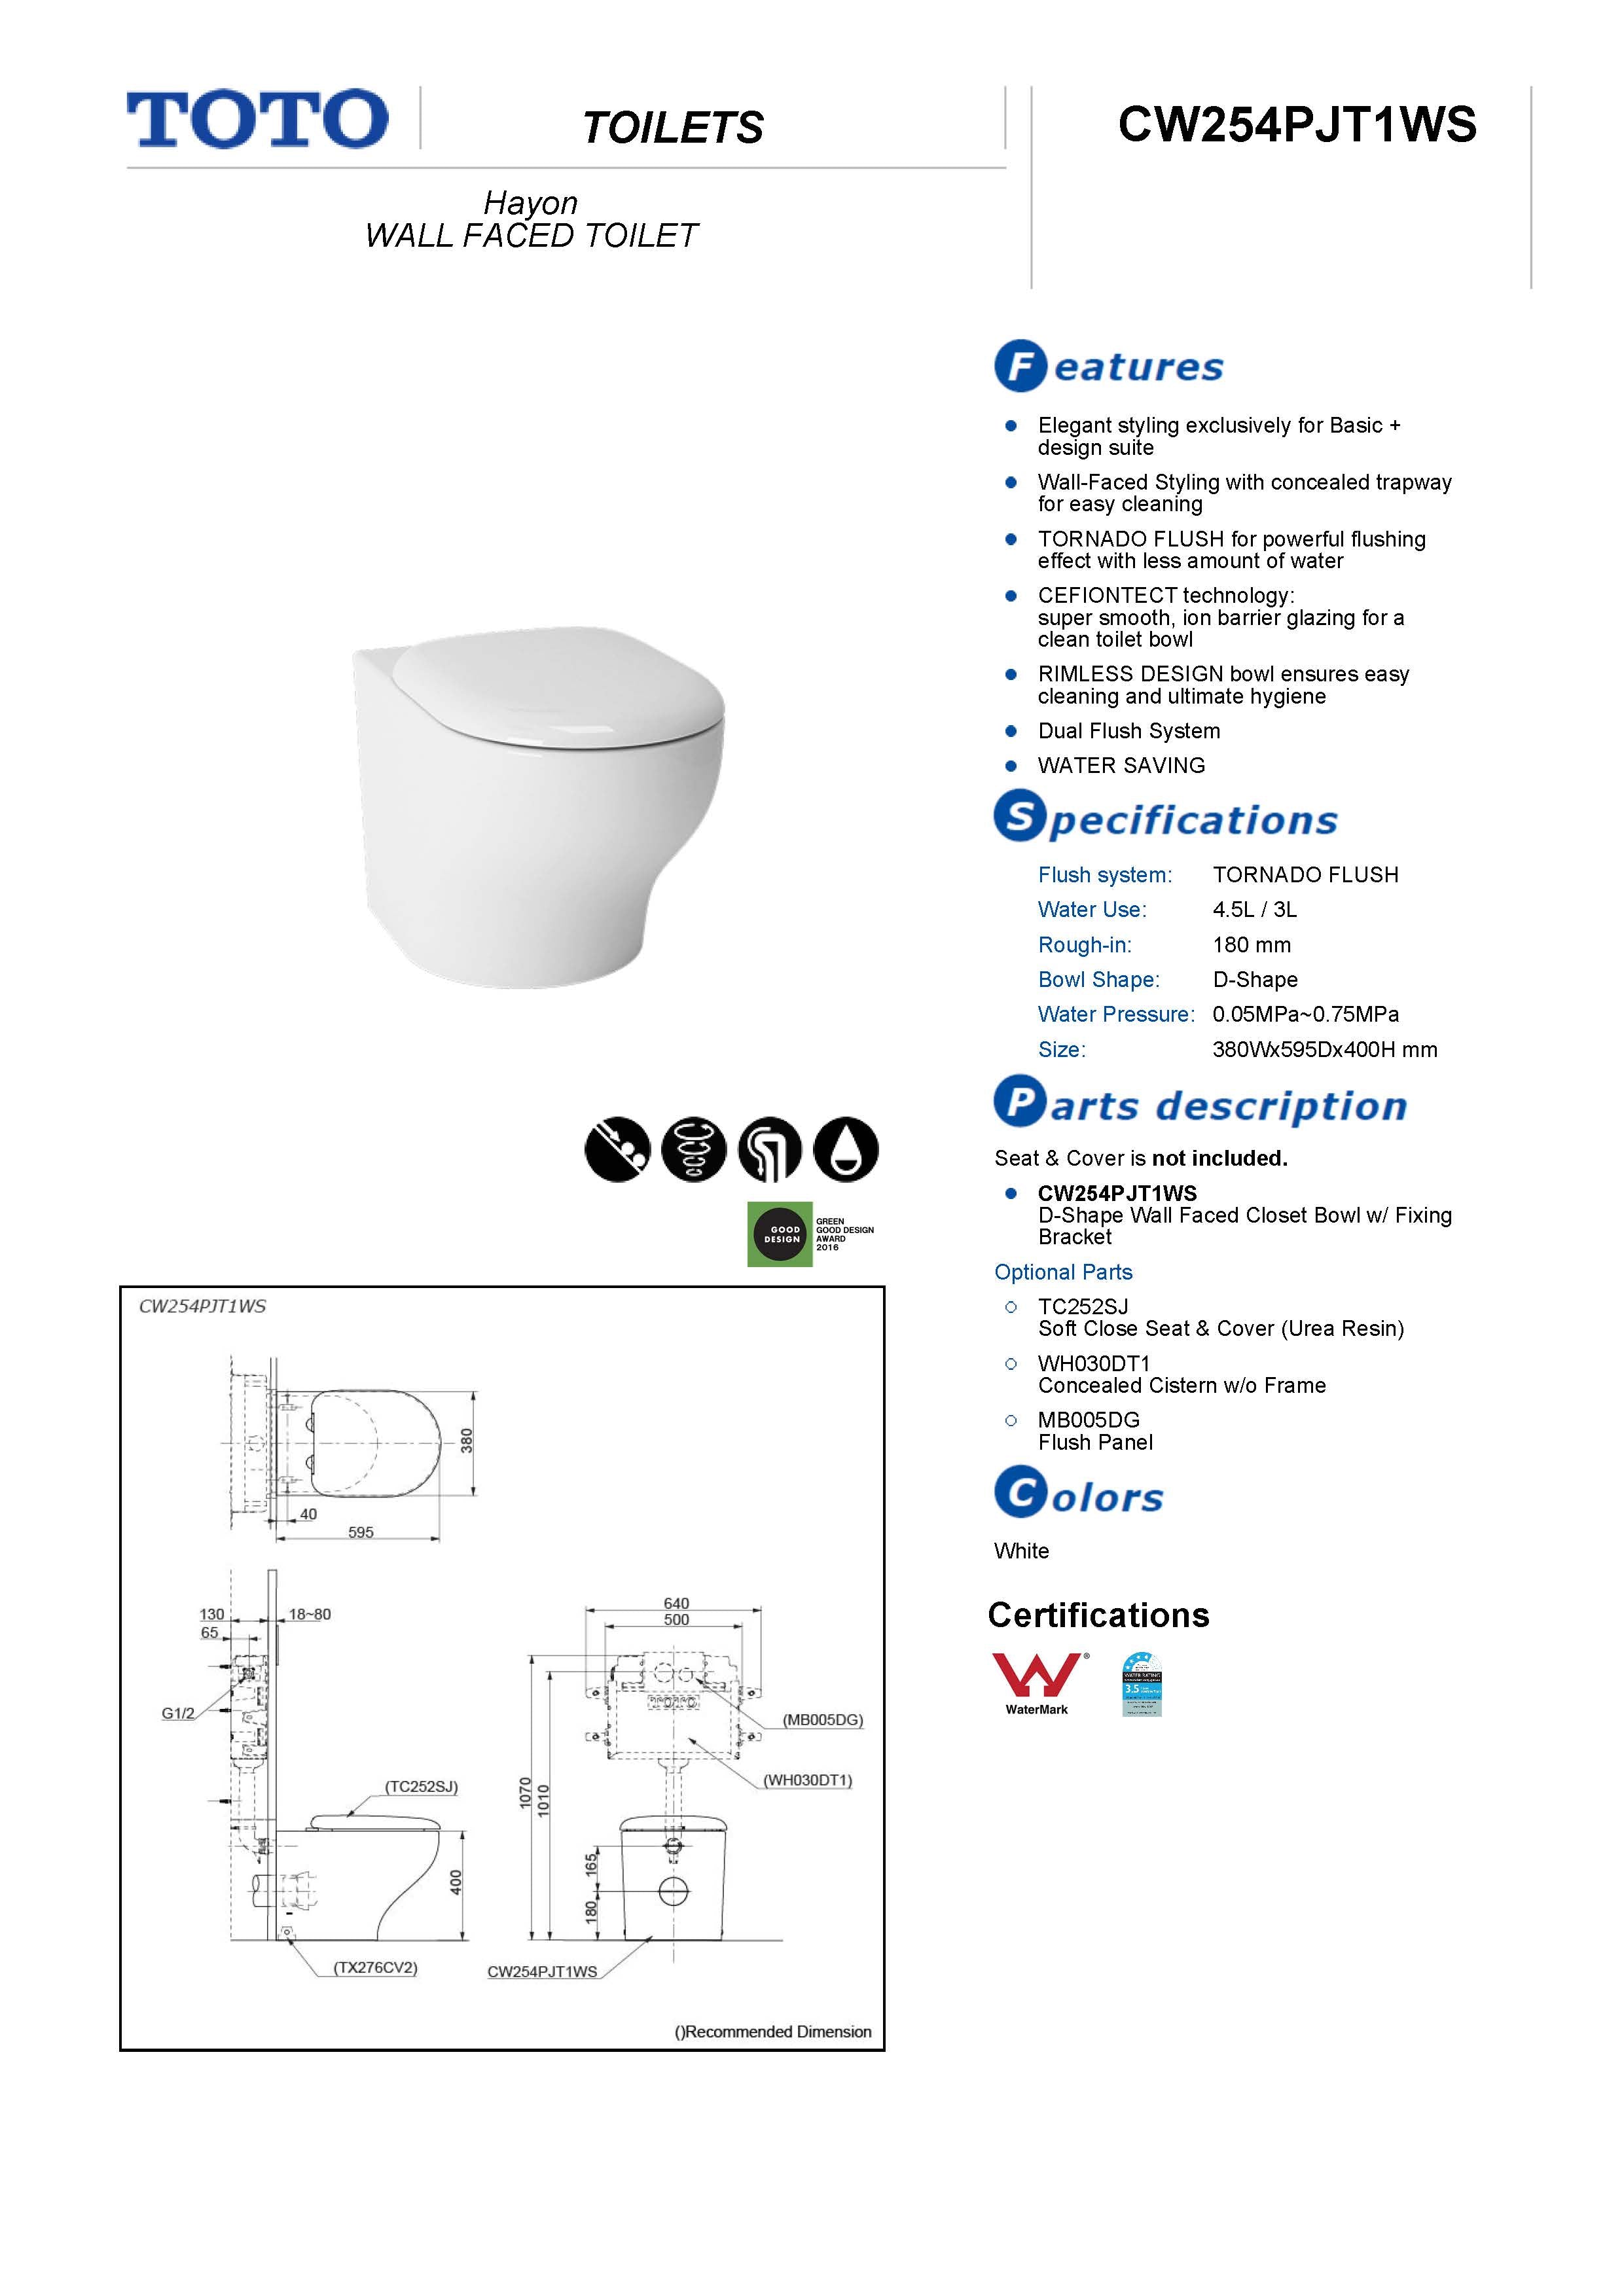 TOTO HAYON WALL FACED TOILET (D-SHAPE) GLOSS WHITE